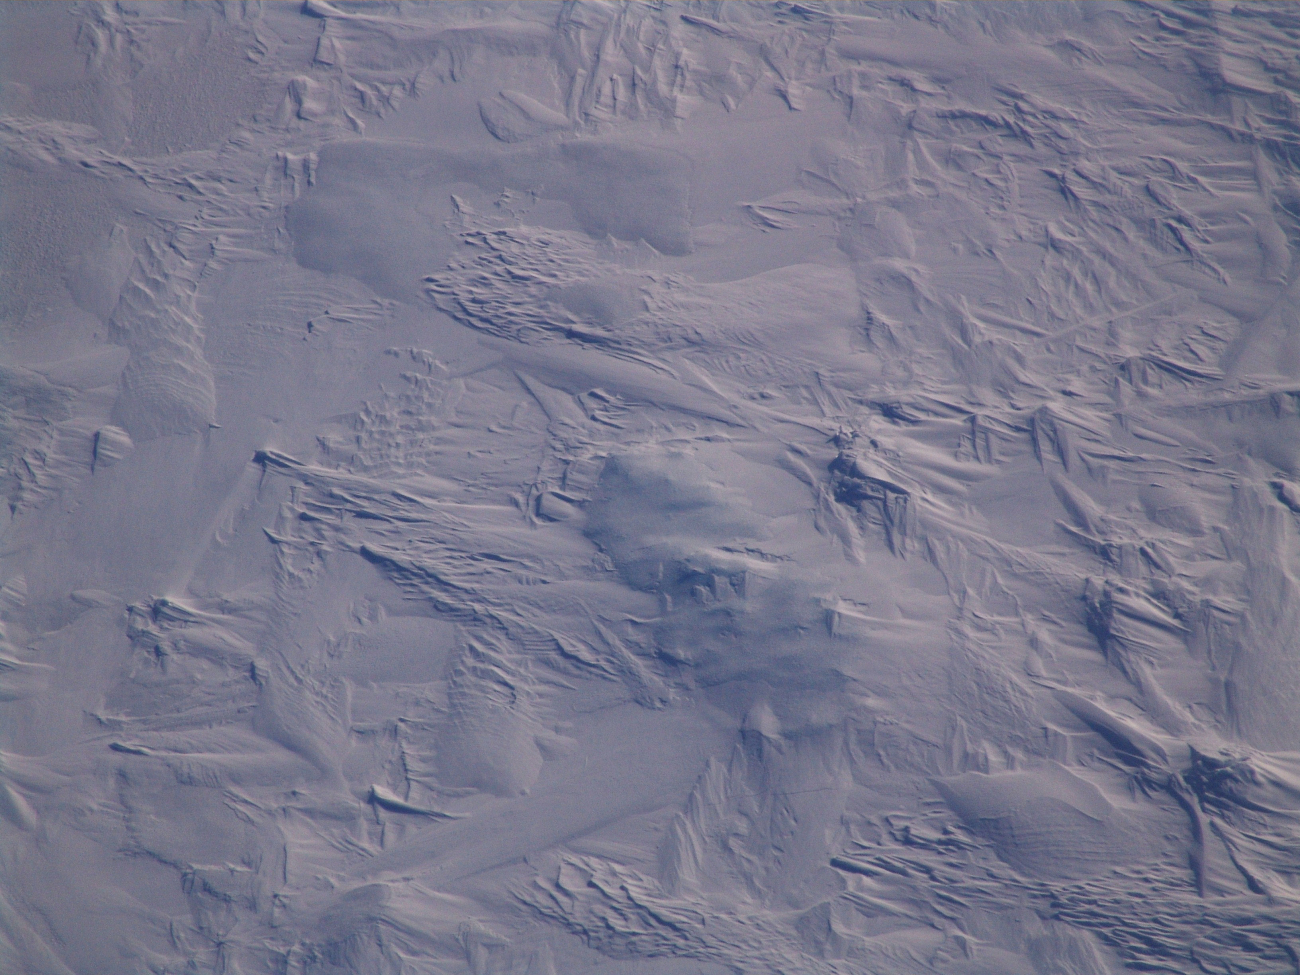 Multi-year ice with patterns caused by collisions, freezing and refreezing, andwind patterns caused by ablation and wind-sculpted snow